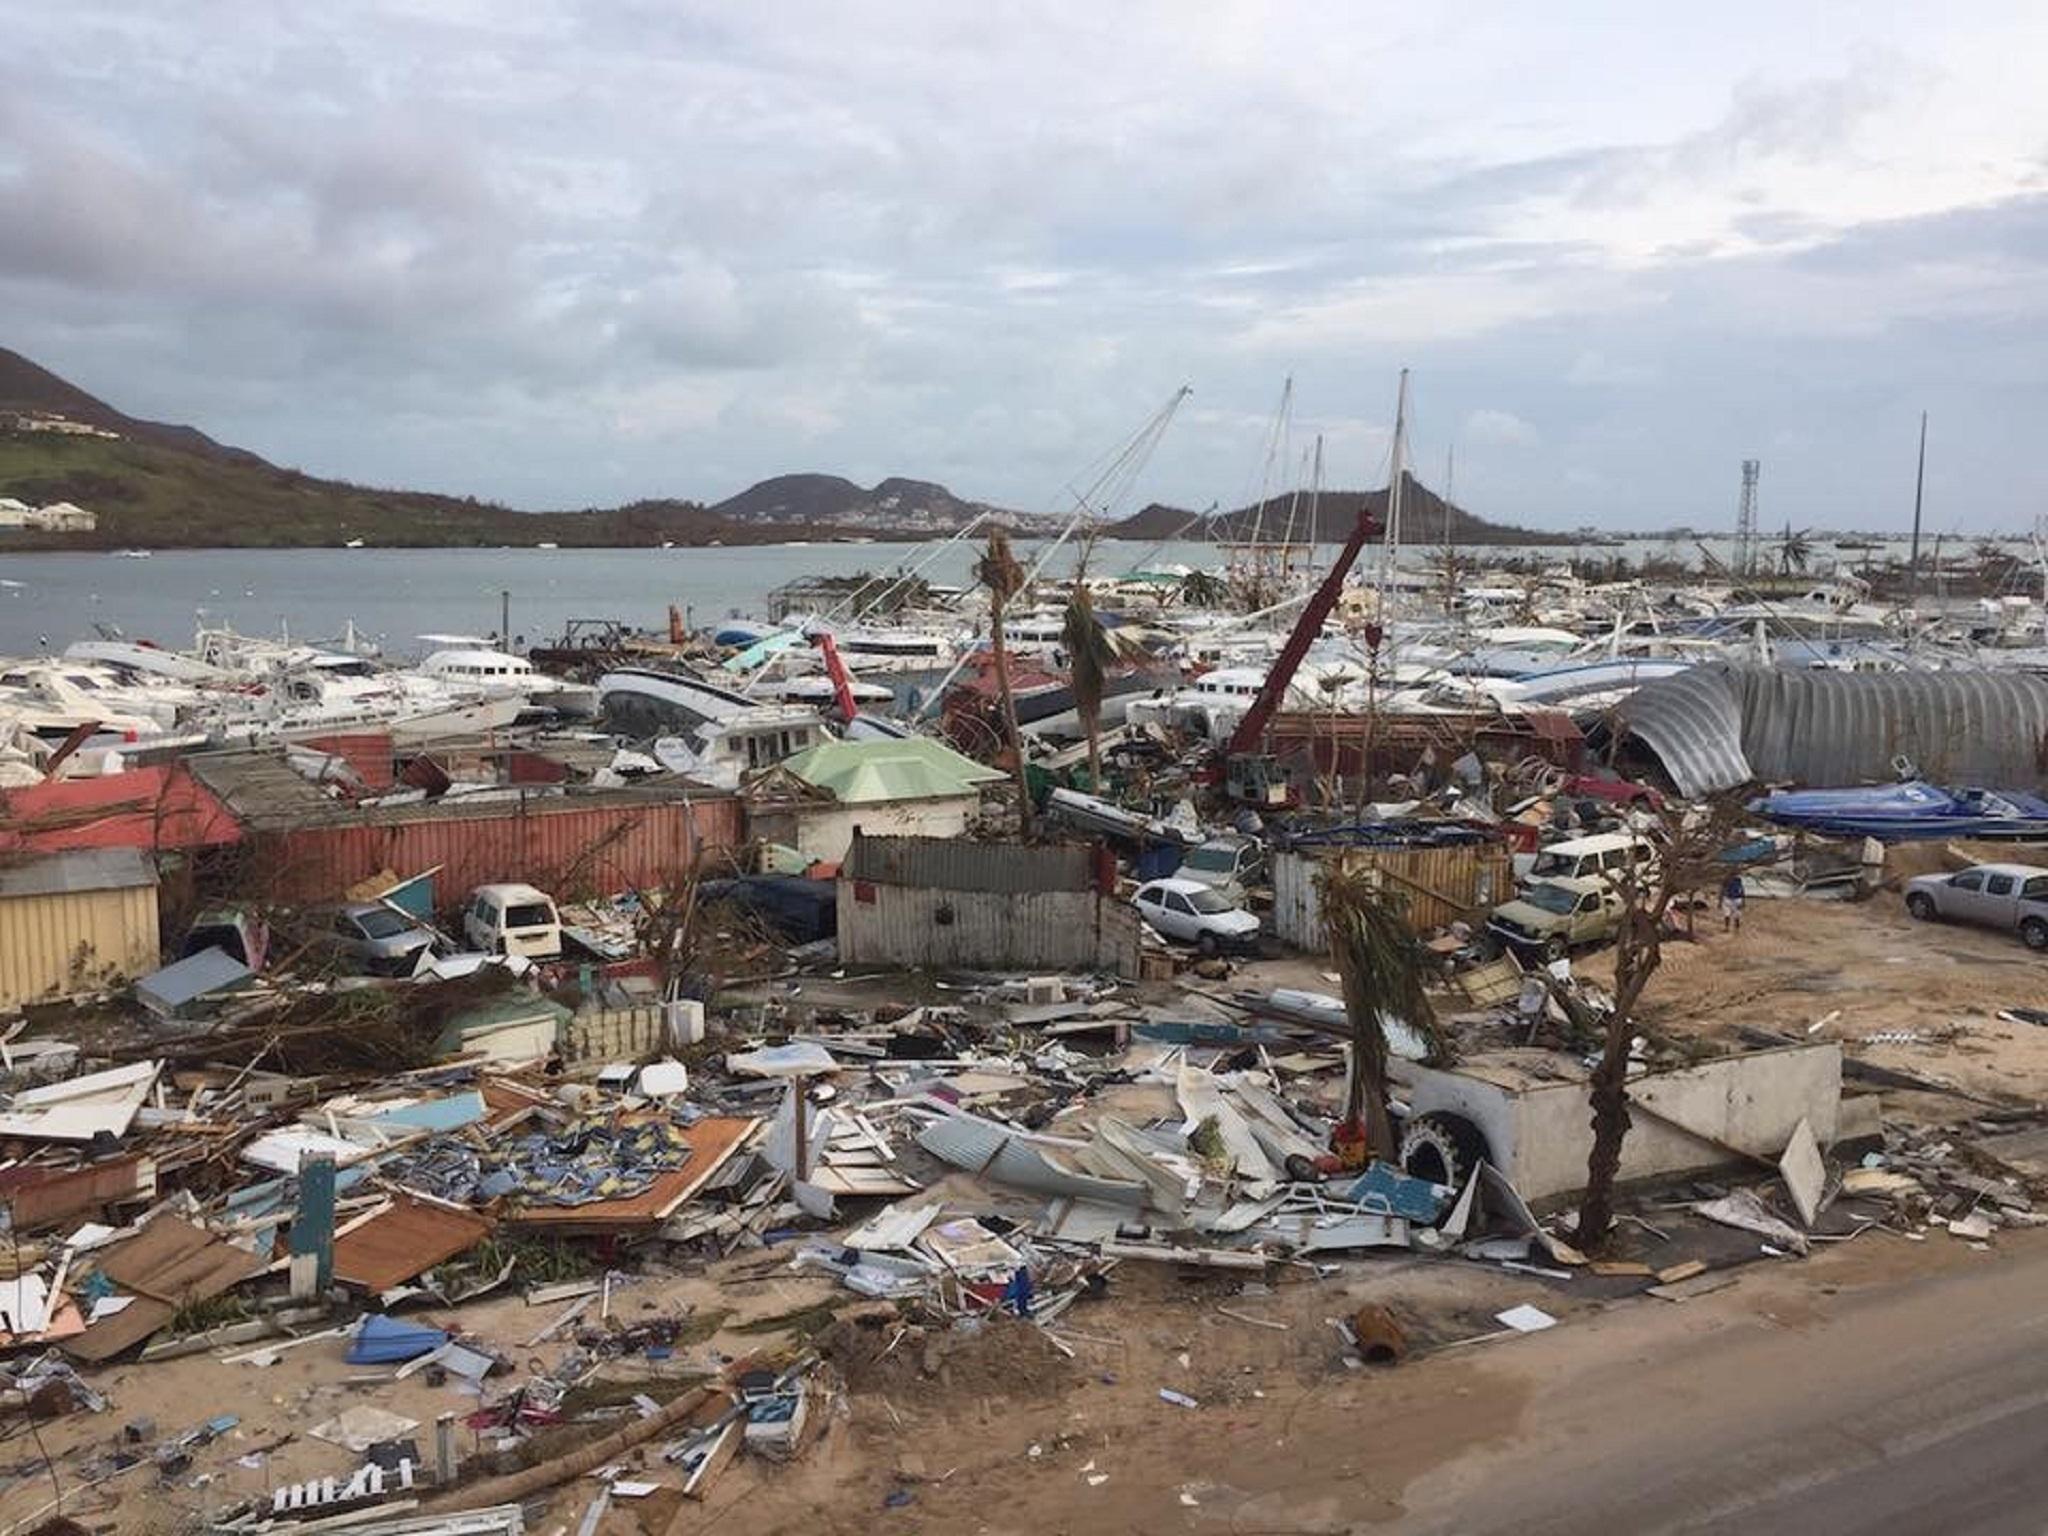 Ninety per cent of the Caribbean island's structures are said to have been destroyed in the storm